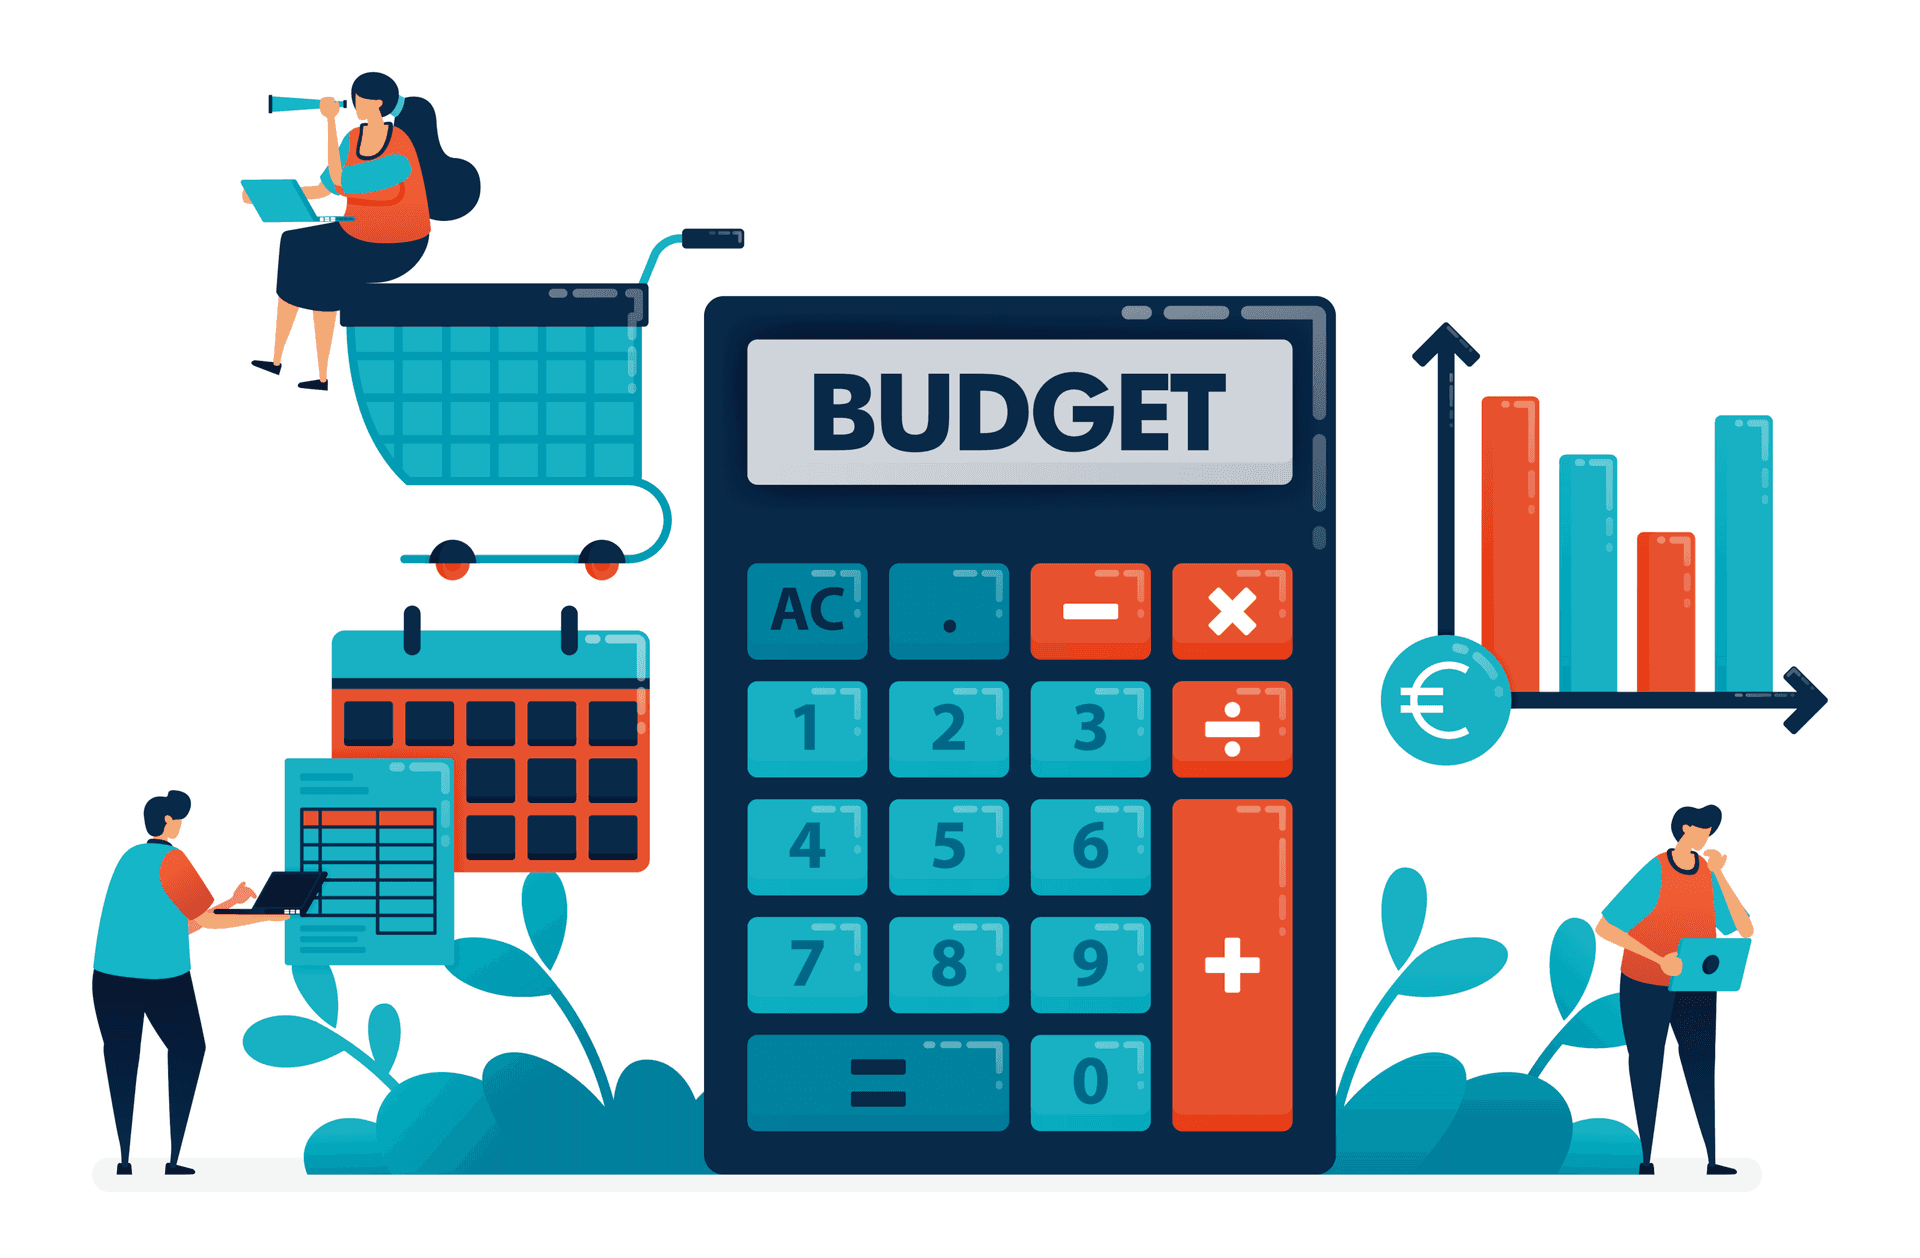 So how can you create a useful spending and savings budget? Read on to find out. 